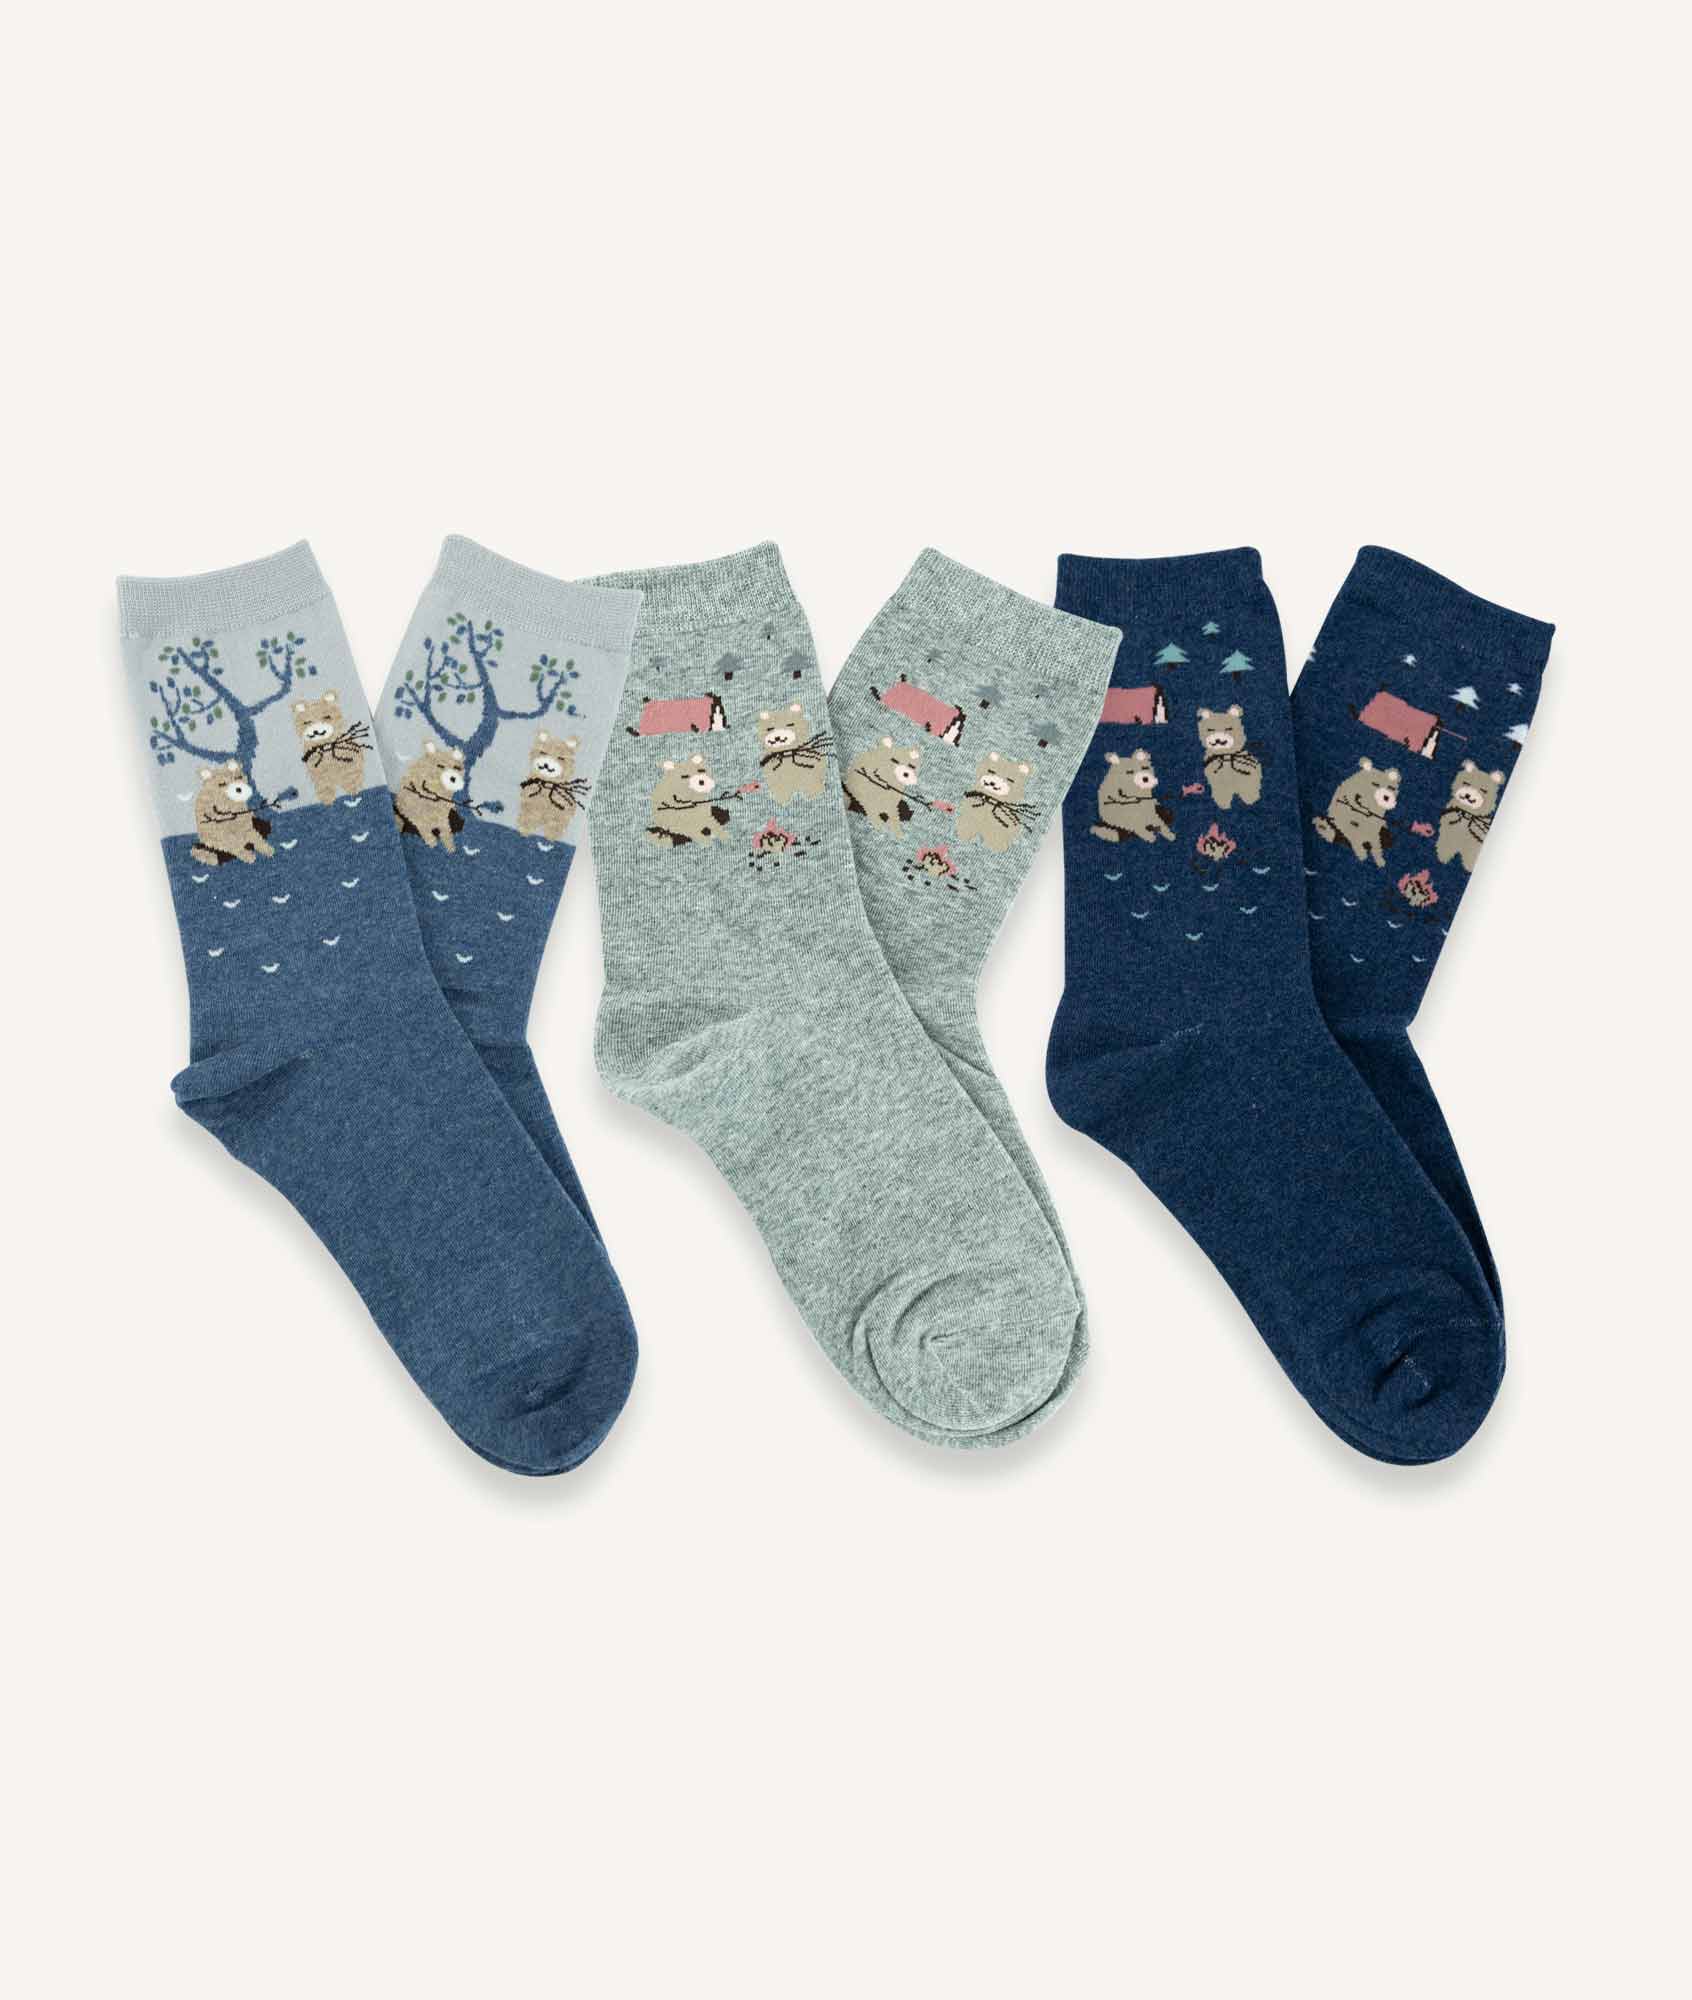 Calcetines largos Mujer (Pack de 3 pares) Oso - Channo Woman